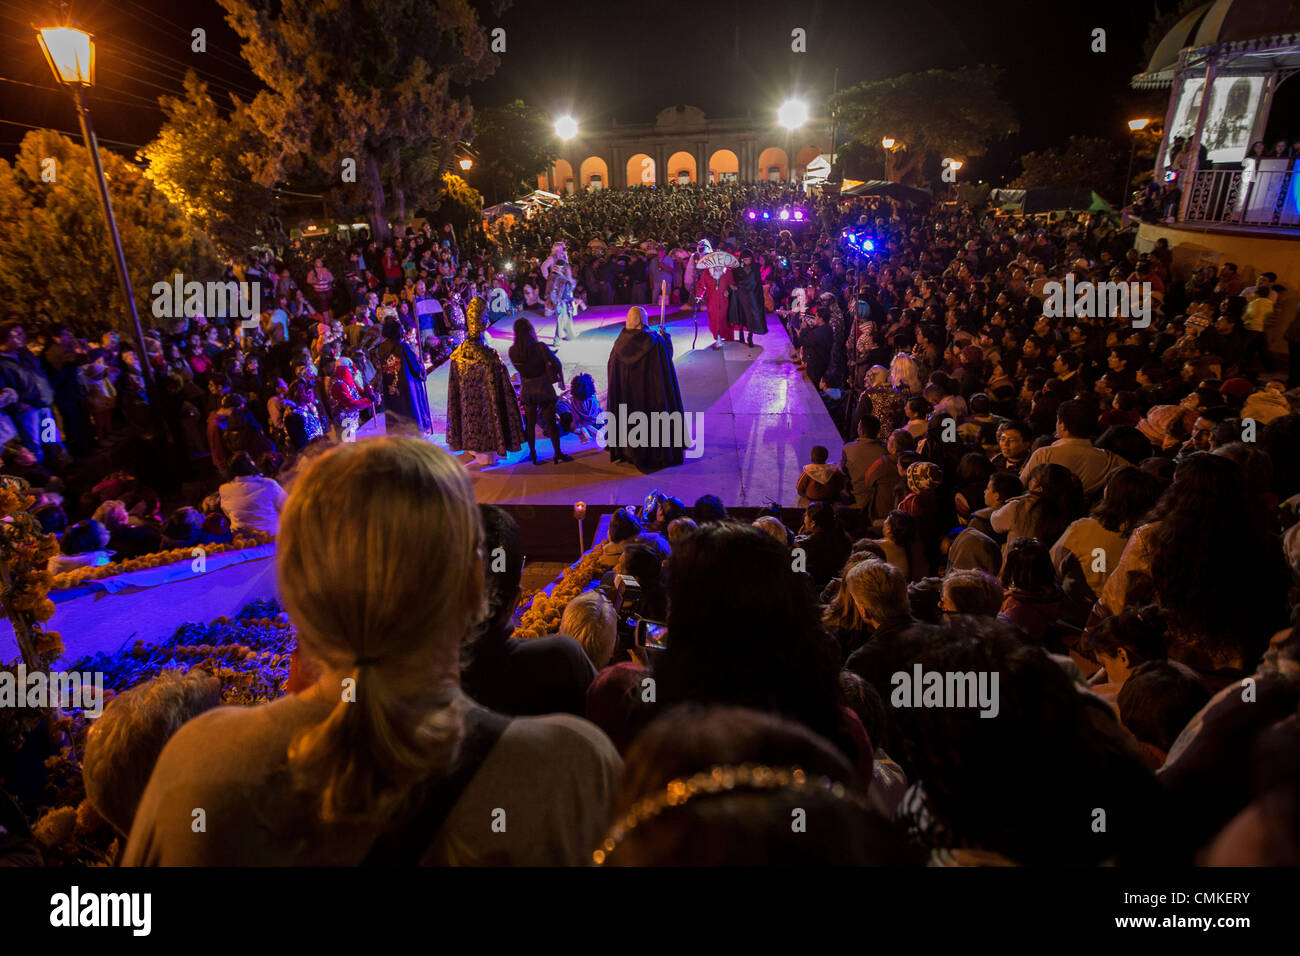 Hundreds of people gather to watch a play with costumed performers to celebrate the Day of the Dead Festival known in spanish as D’a de Muertos on November 1, 2013 in San Agustin Etlan, Oaxaca, Mexico. Stock Photo